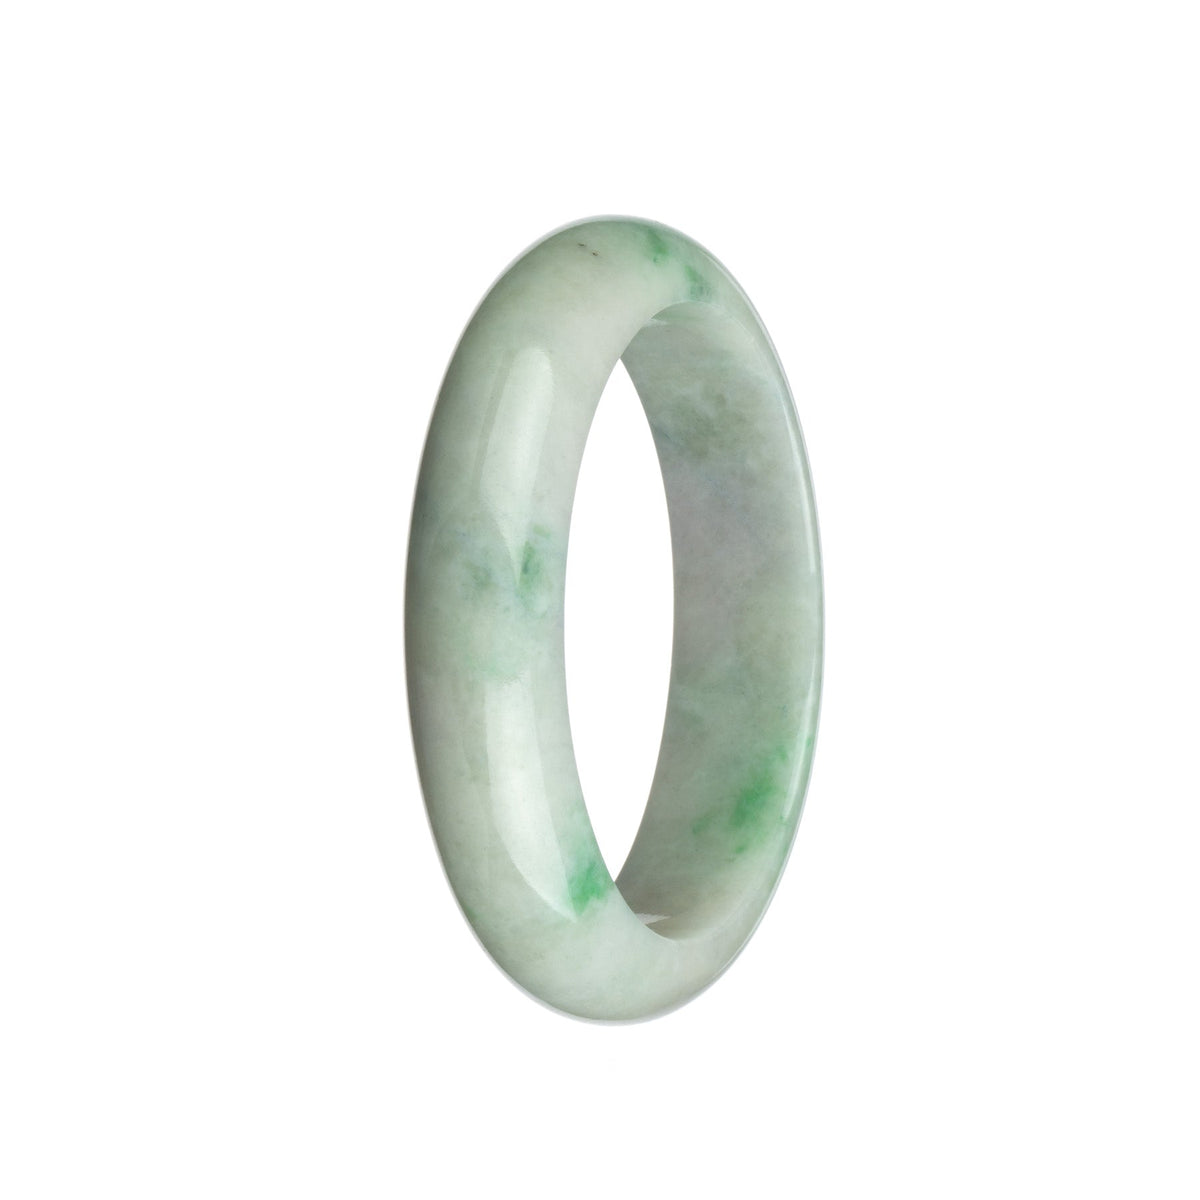 A high-quality traditional jade bracelet in a half-moon shape, made from Grade A white jade with beautiful apple green hues. Perfect for adding a touch of elegance and style to any outfit.